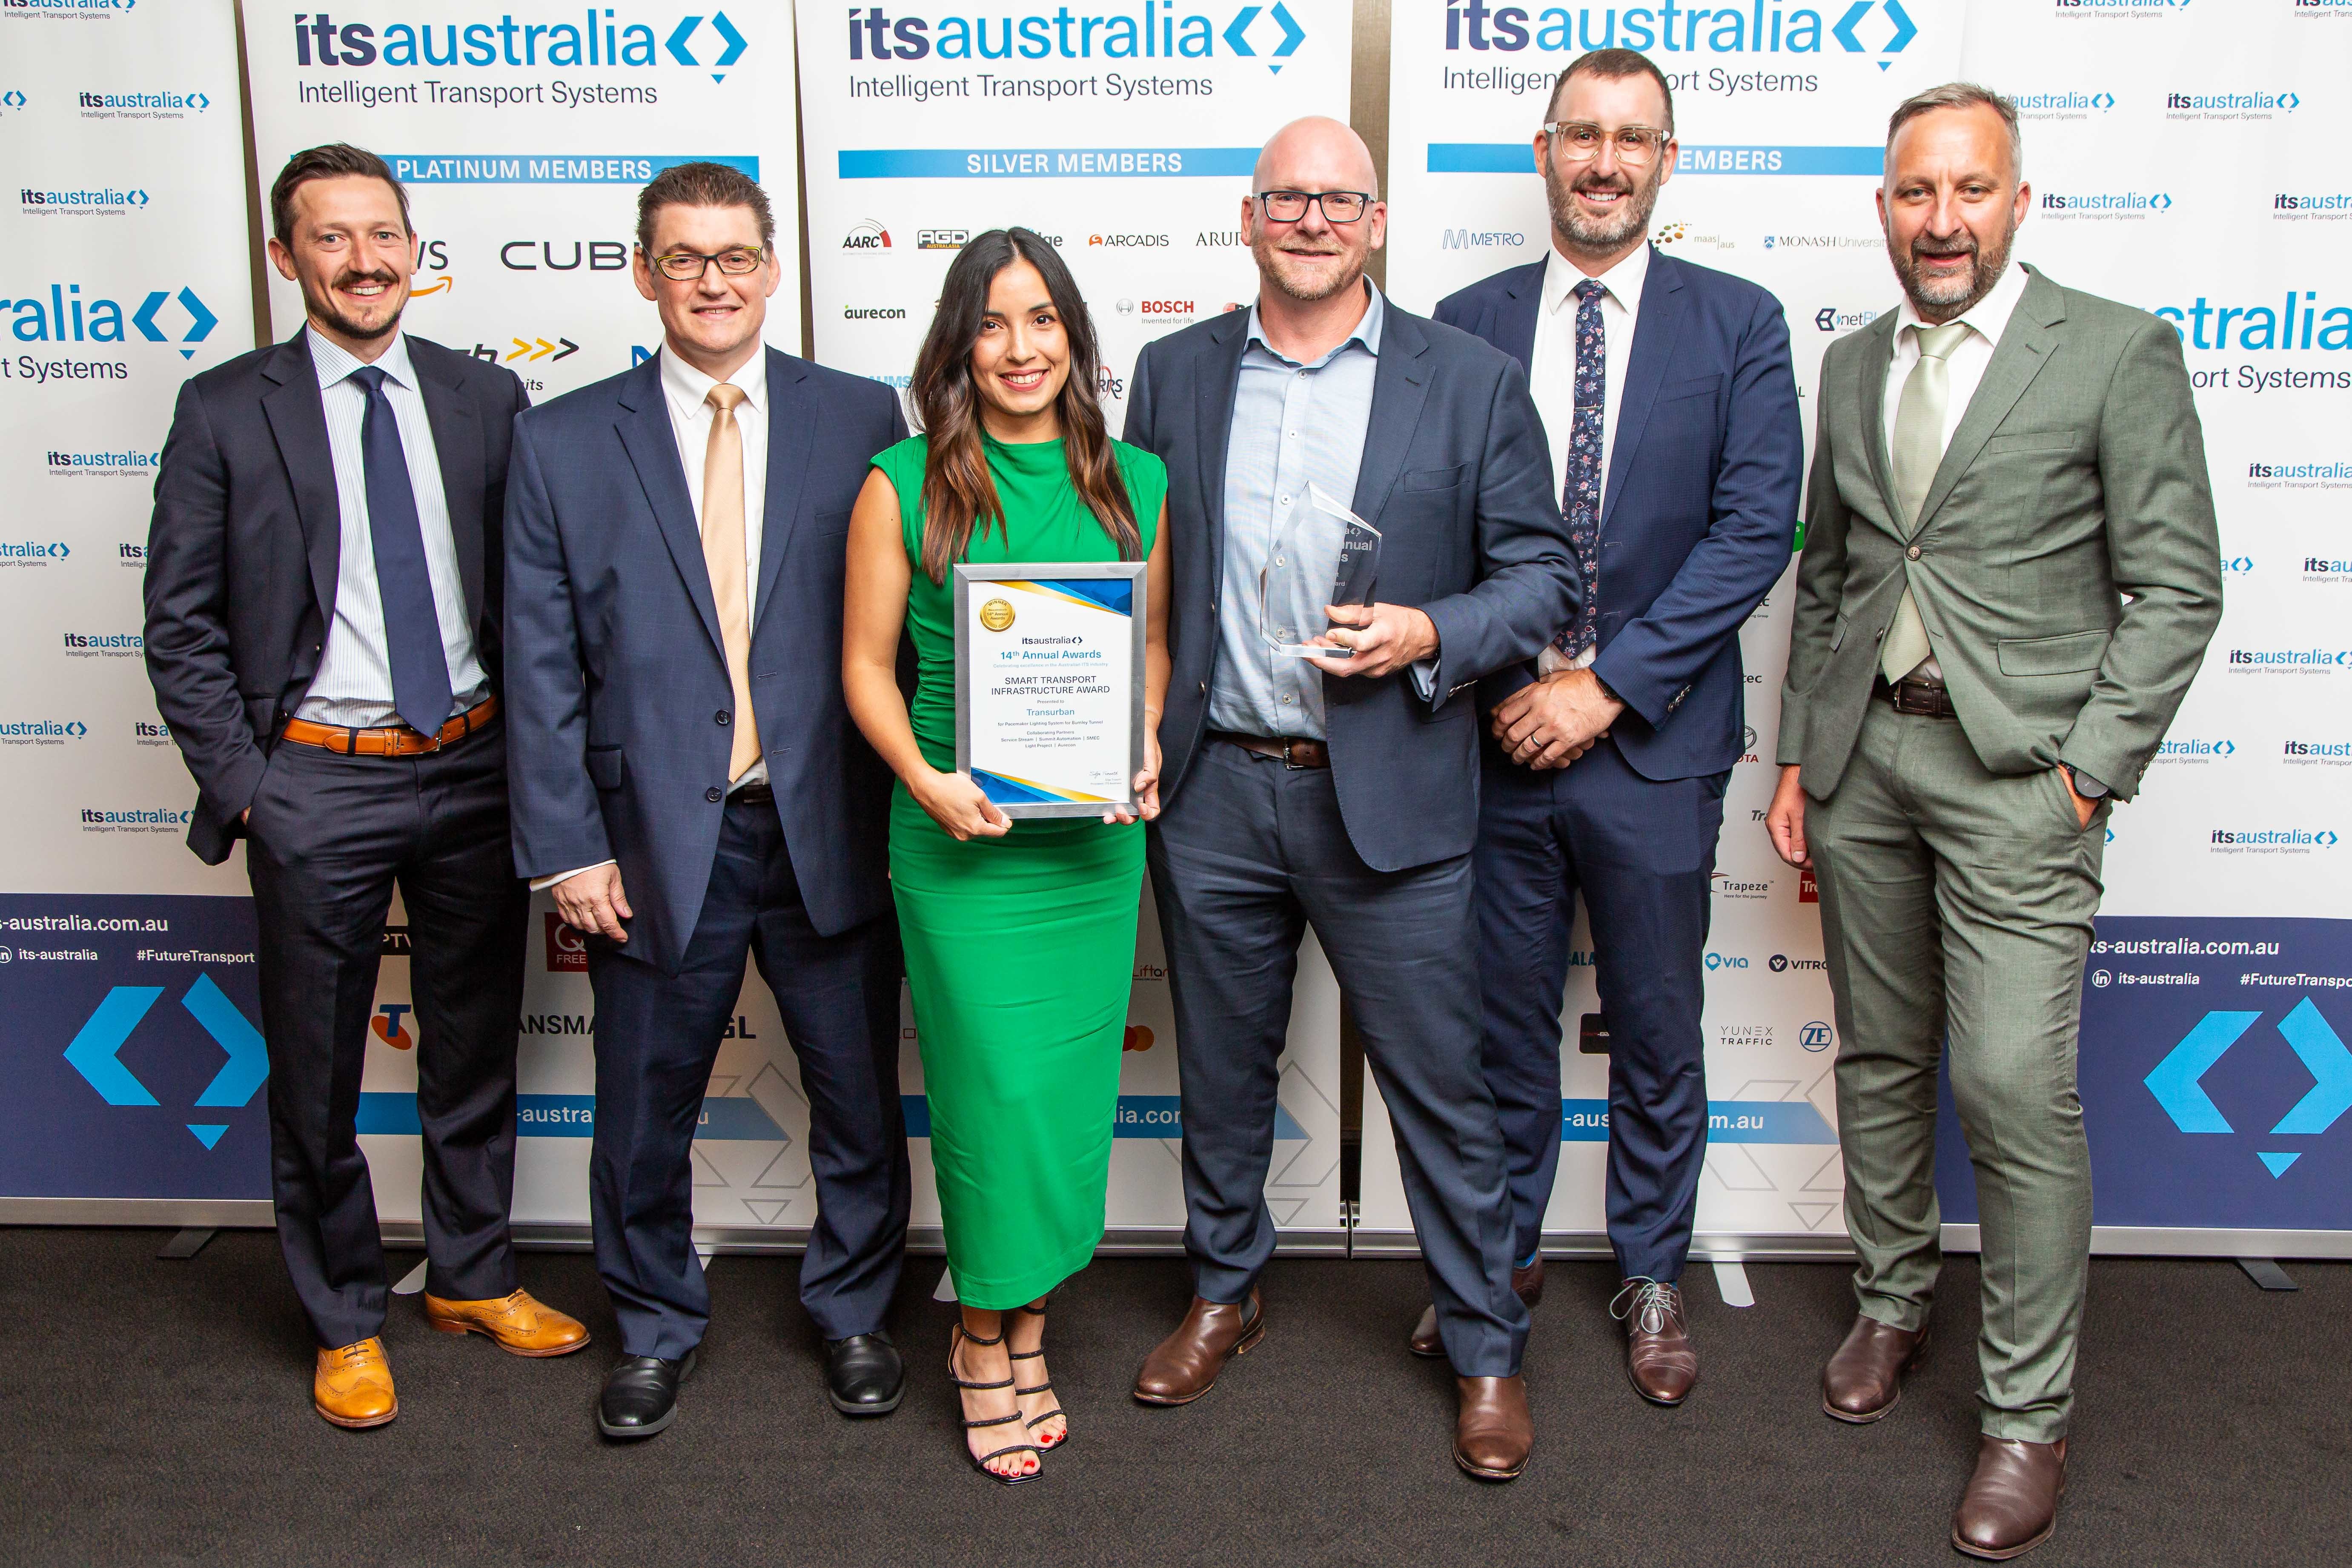 The team from Transurban after winning the Smart Transport Infrastructure Award